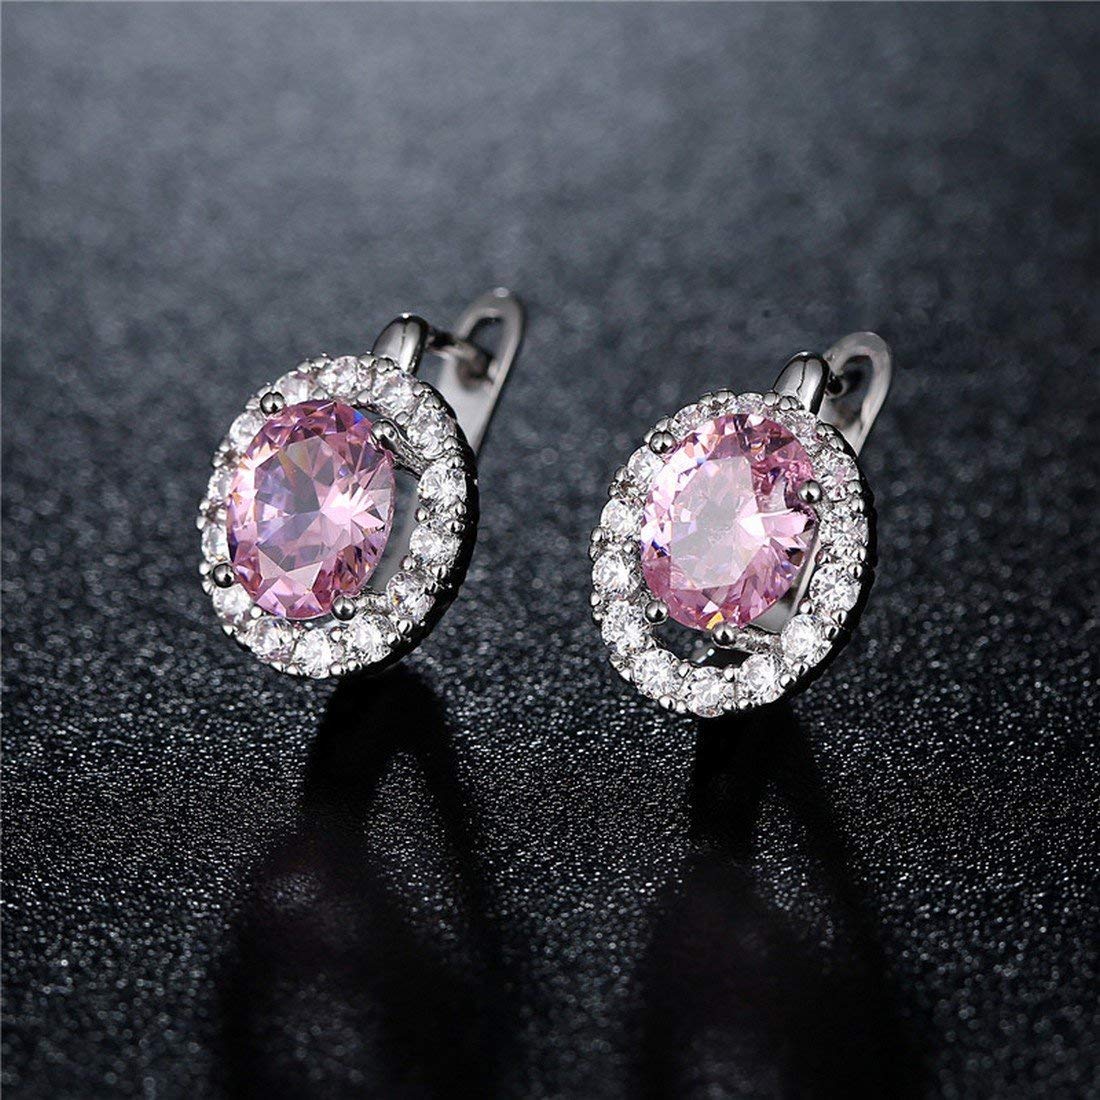 Yellow Chimes Clip On Earrings for Women Pink Crystal Silver Plated Clip On Stud Earrings for Women and Girls